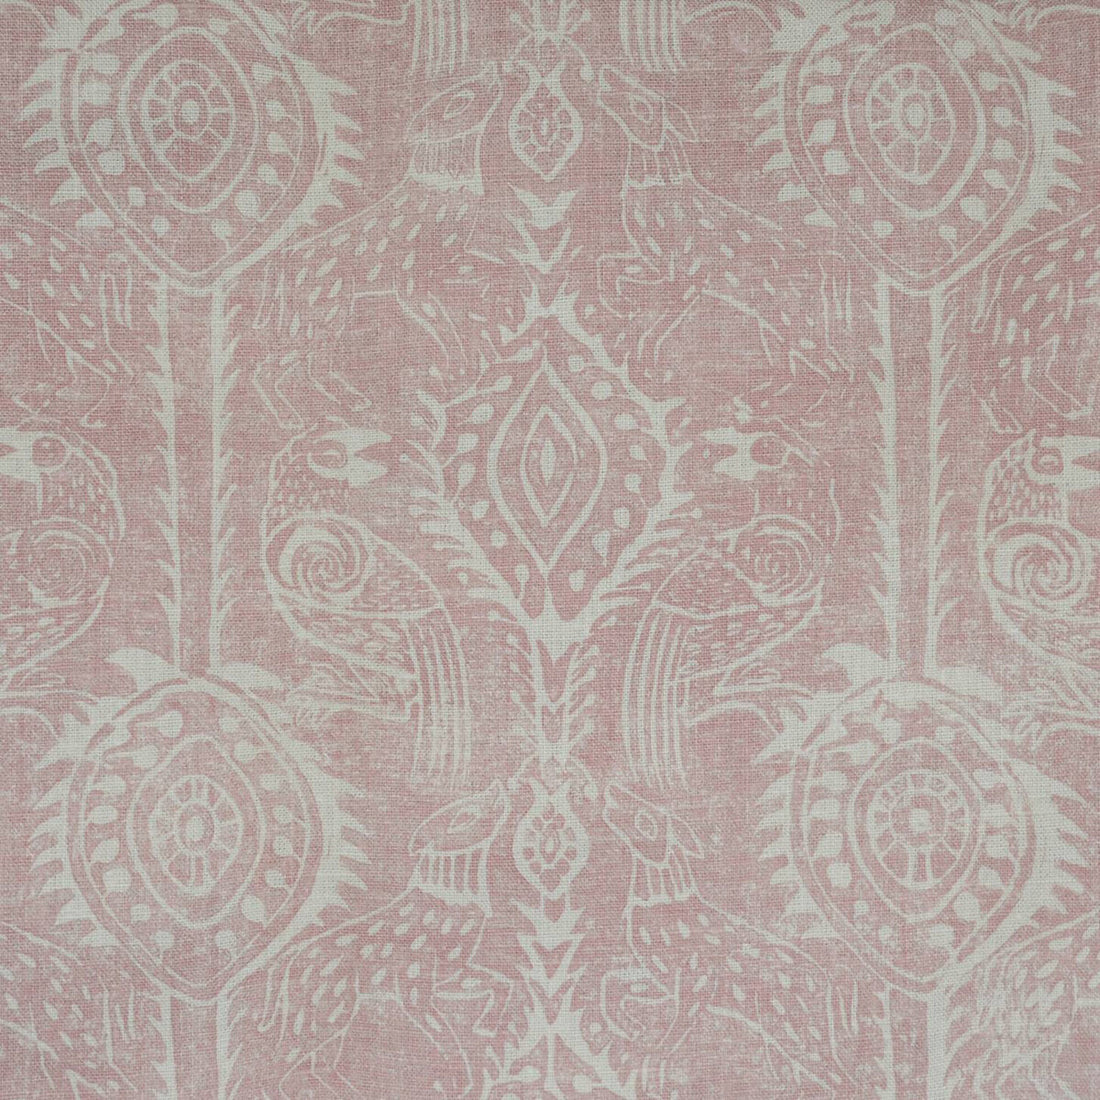 Beasties fabric in pink color - pattern BFC-3512.7.0 - by Lee Jofa in the Blithfield collection